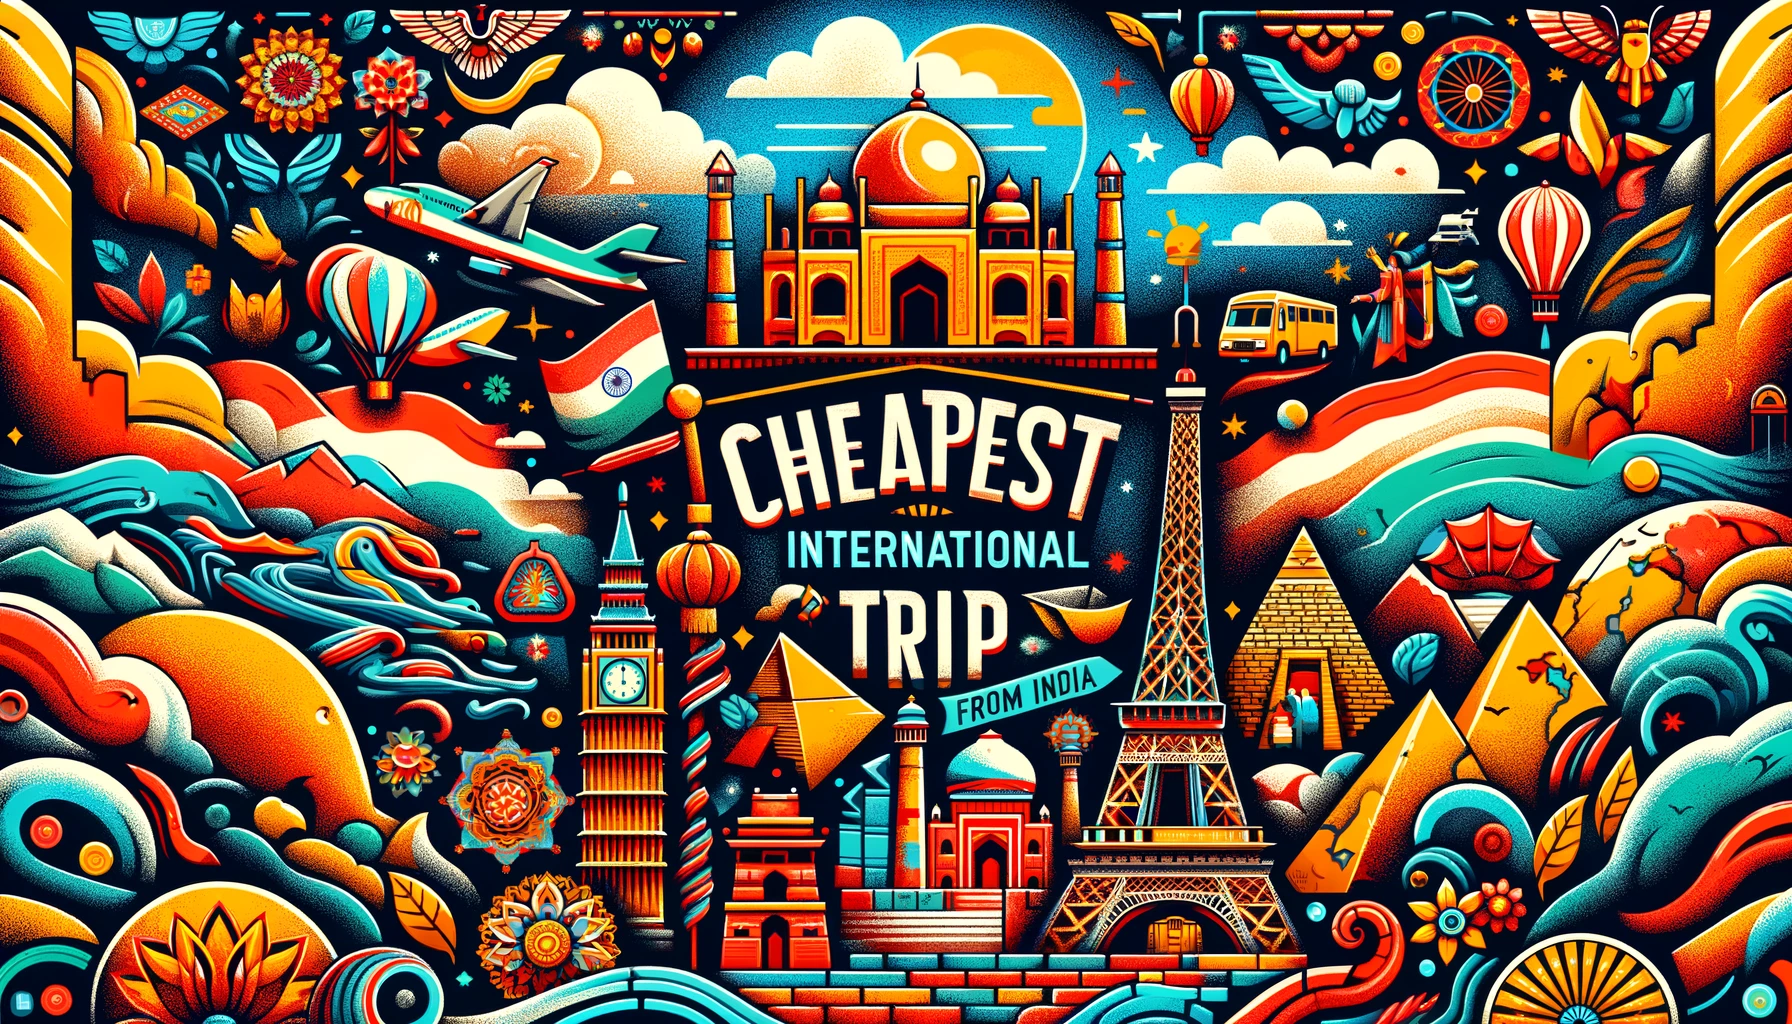 Cheapest International Trip From India